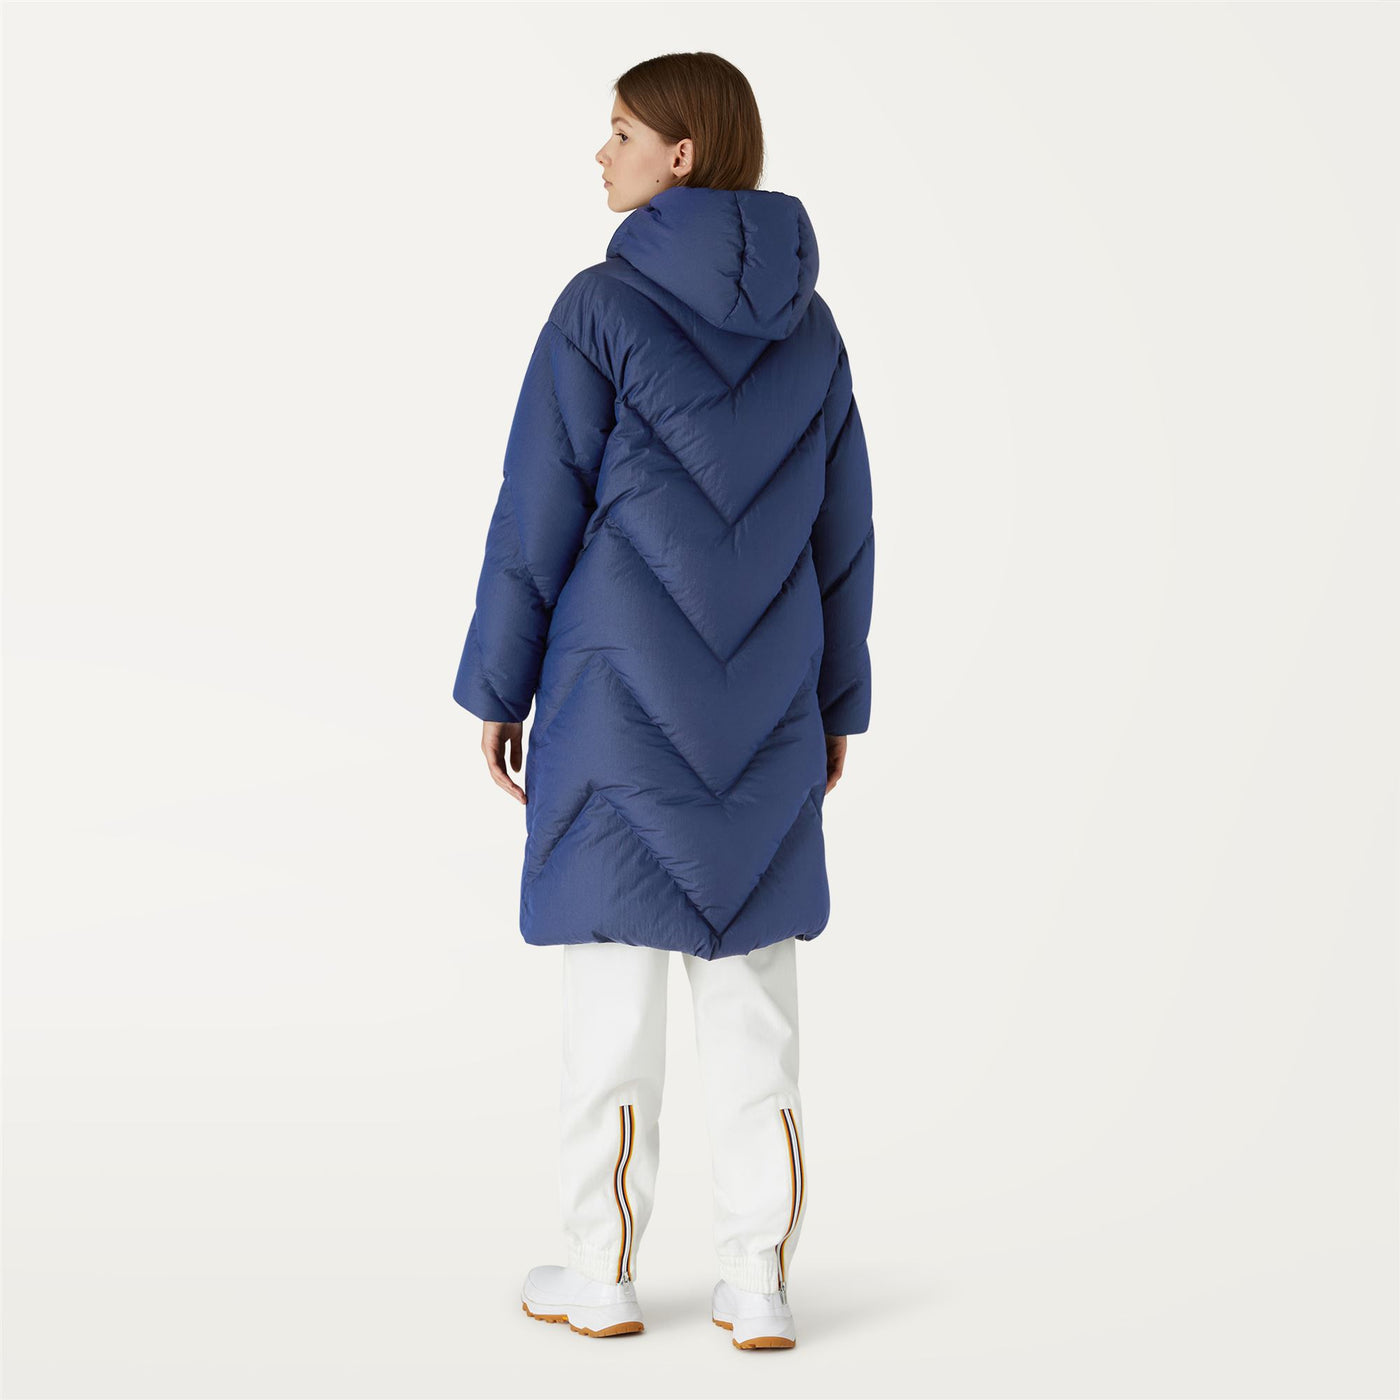 Jackets Woman SIDOINEL HEAVY QUILTED LAPIS LAZULI Long BLUE MEDIEVAL - SILVER Dressed Front Double		